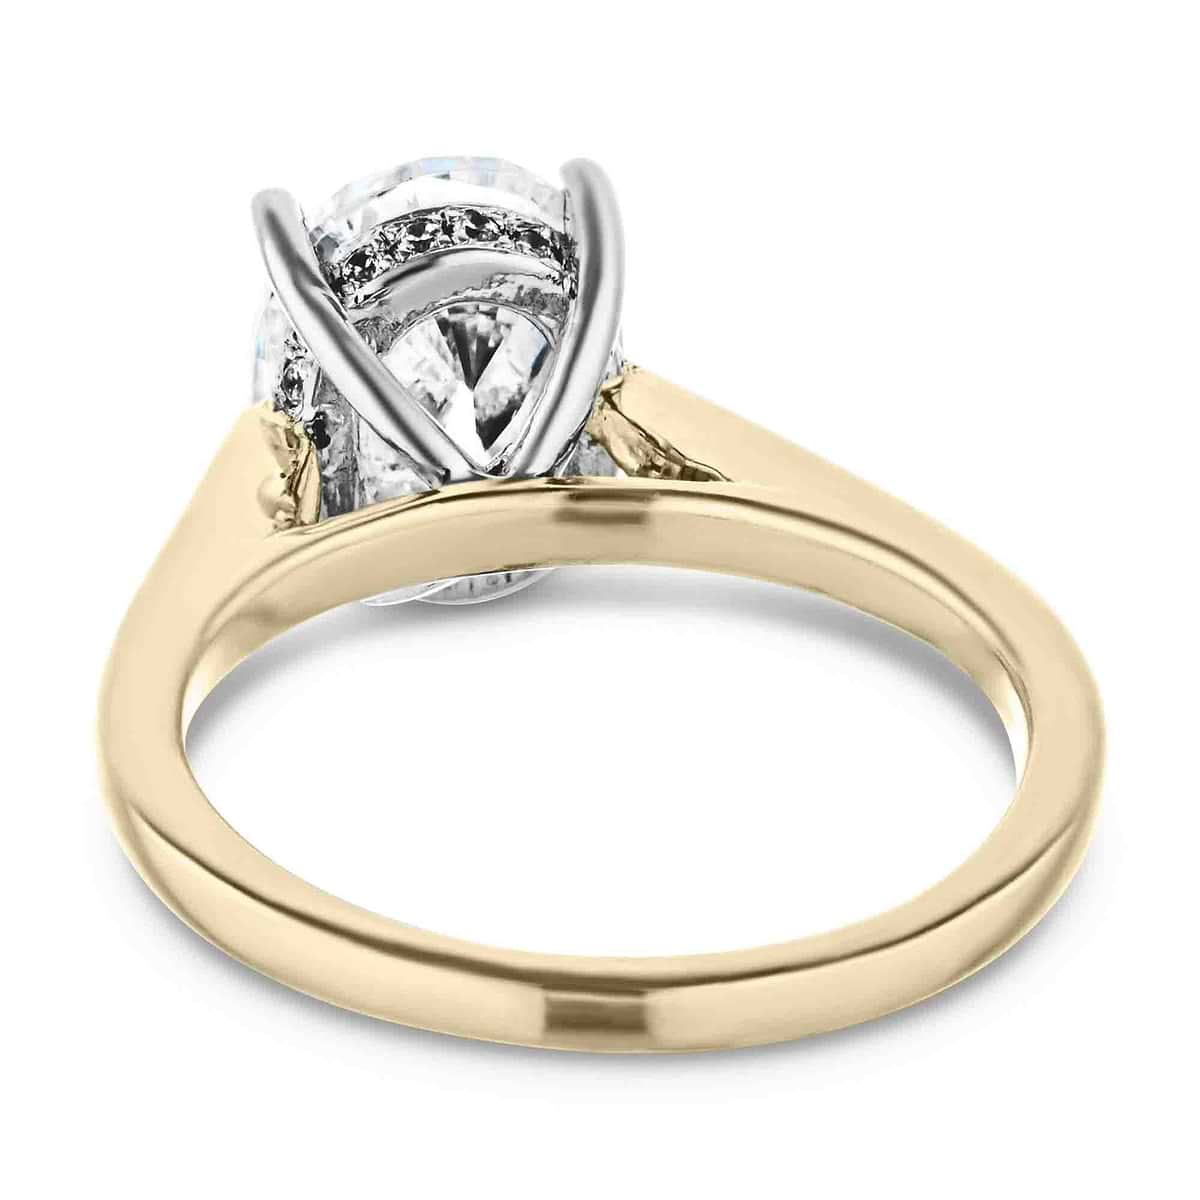 Shown with 2ct Oval Cut Lab Grown Diamond in 14k Yellow Gold and 14K White Gold